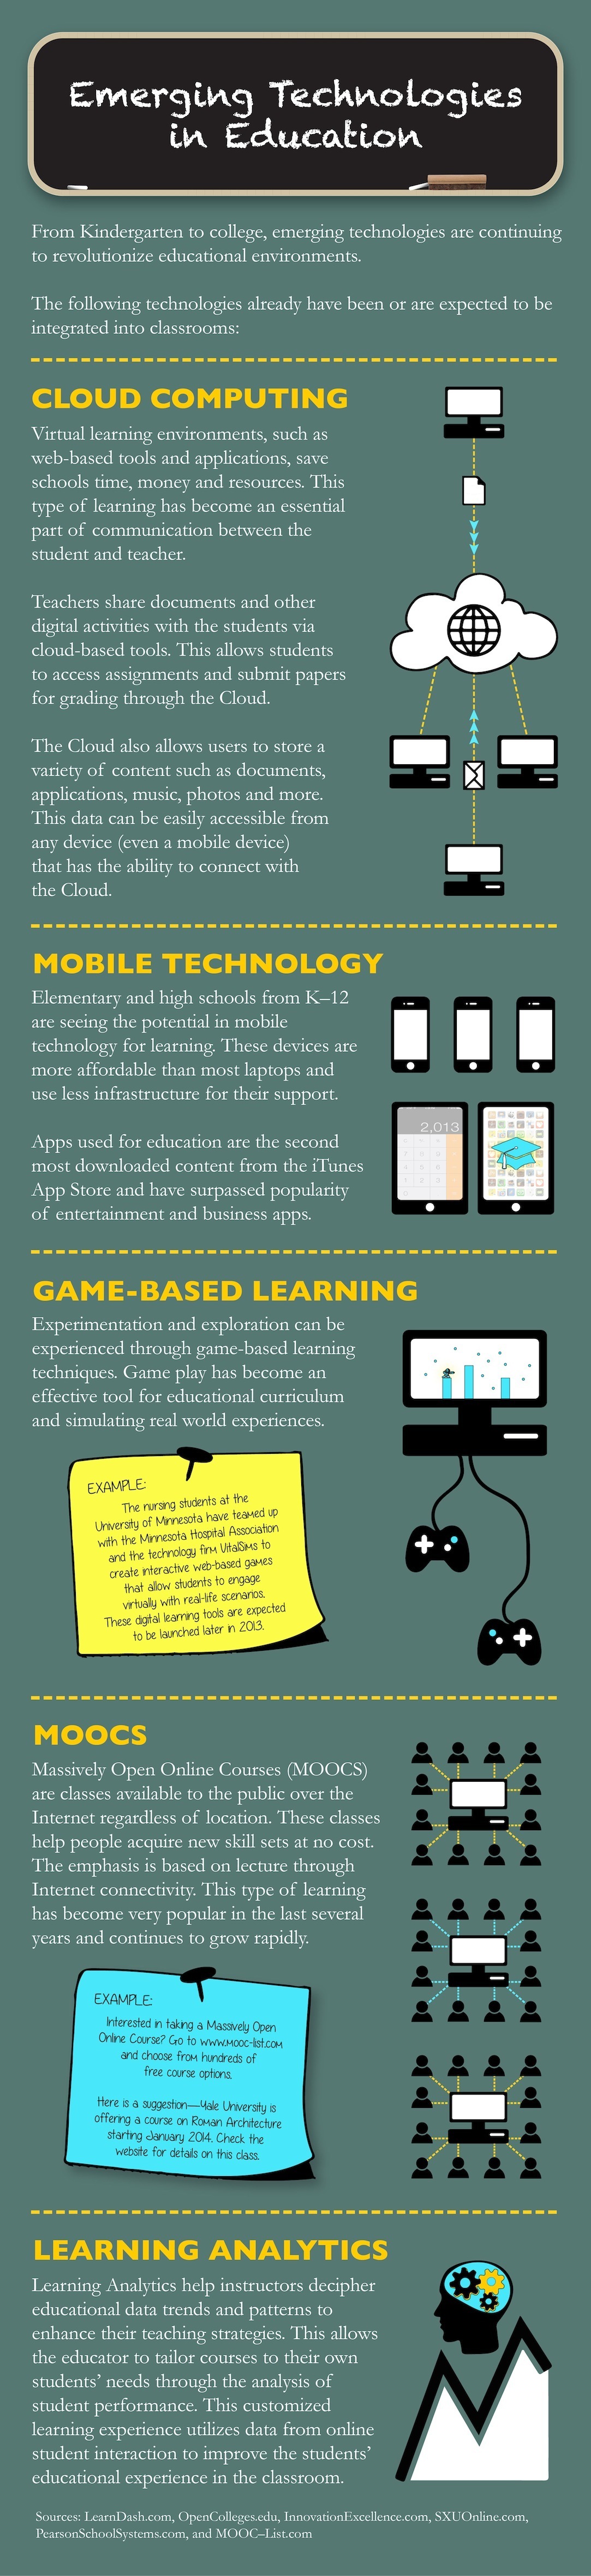 Top 5 Emerging Educational Technologies Infographic